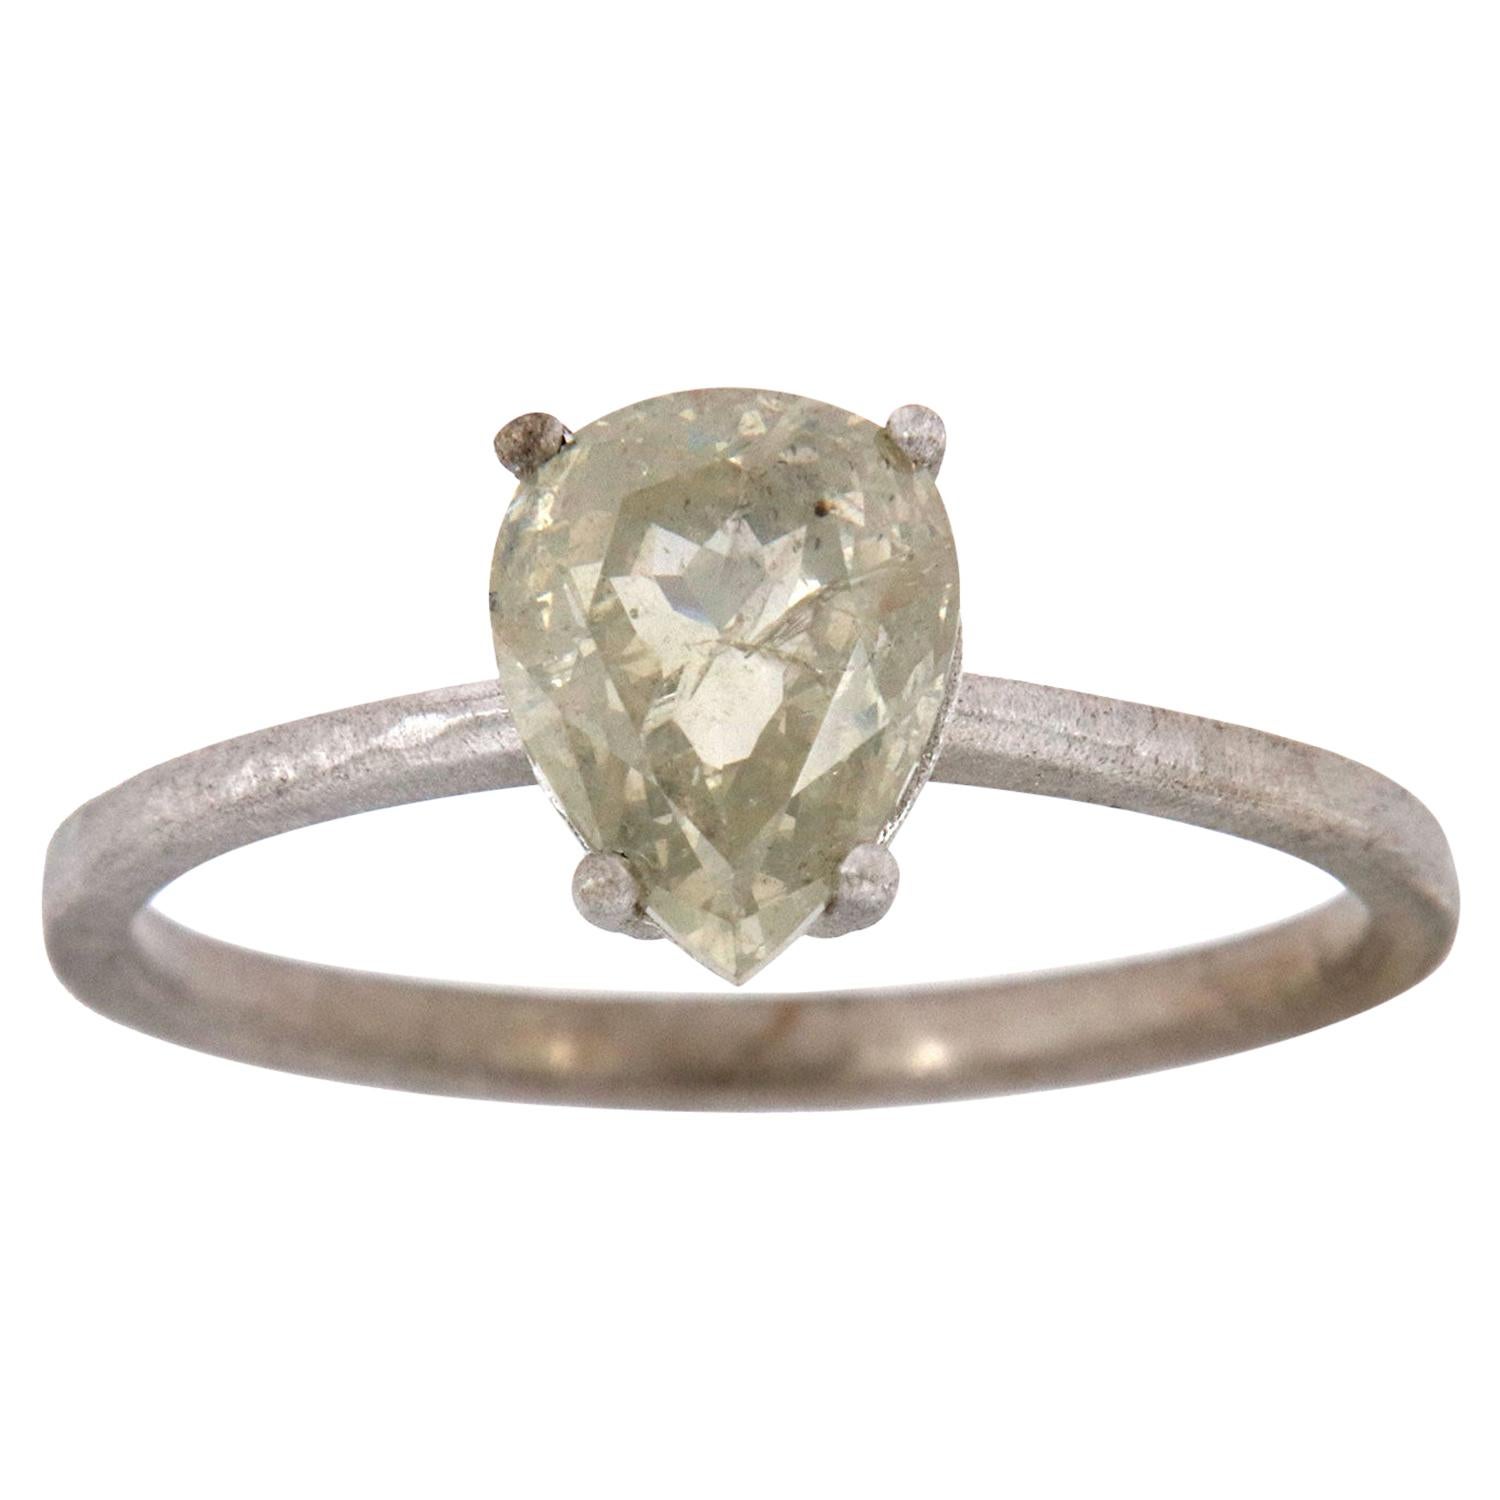 14 Karat White Gold Earhty Solitare Pear "Icey" Diamond Ring Center 1.35 Carat For Sale